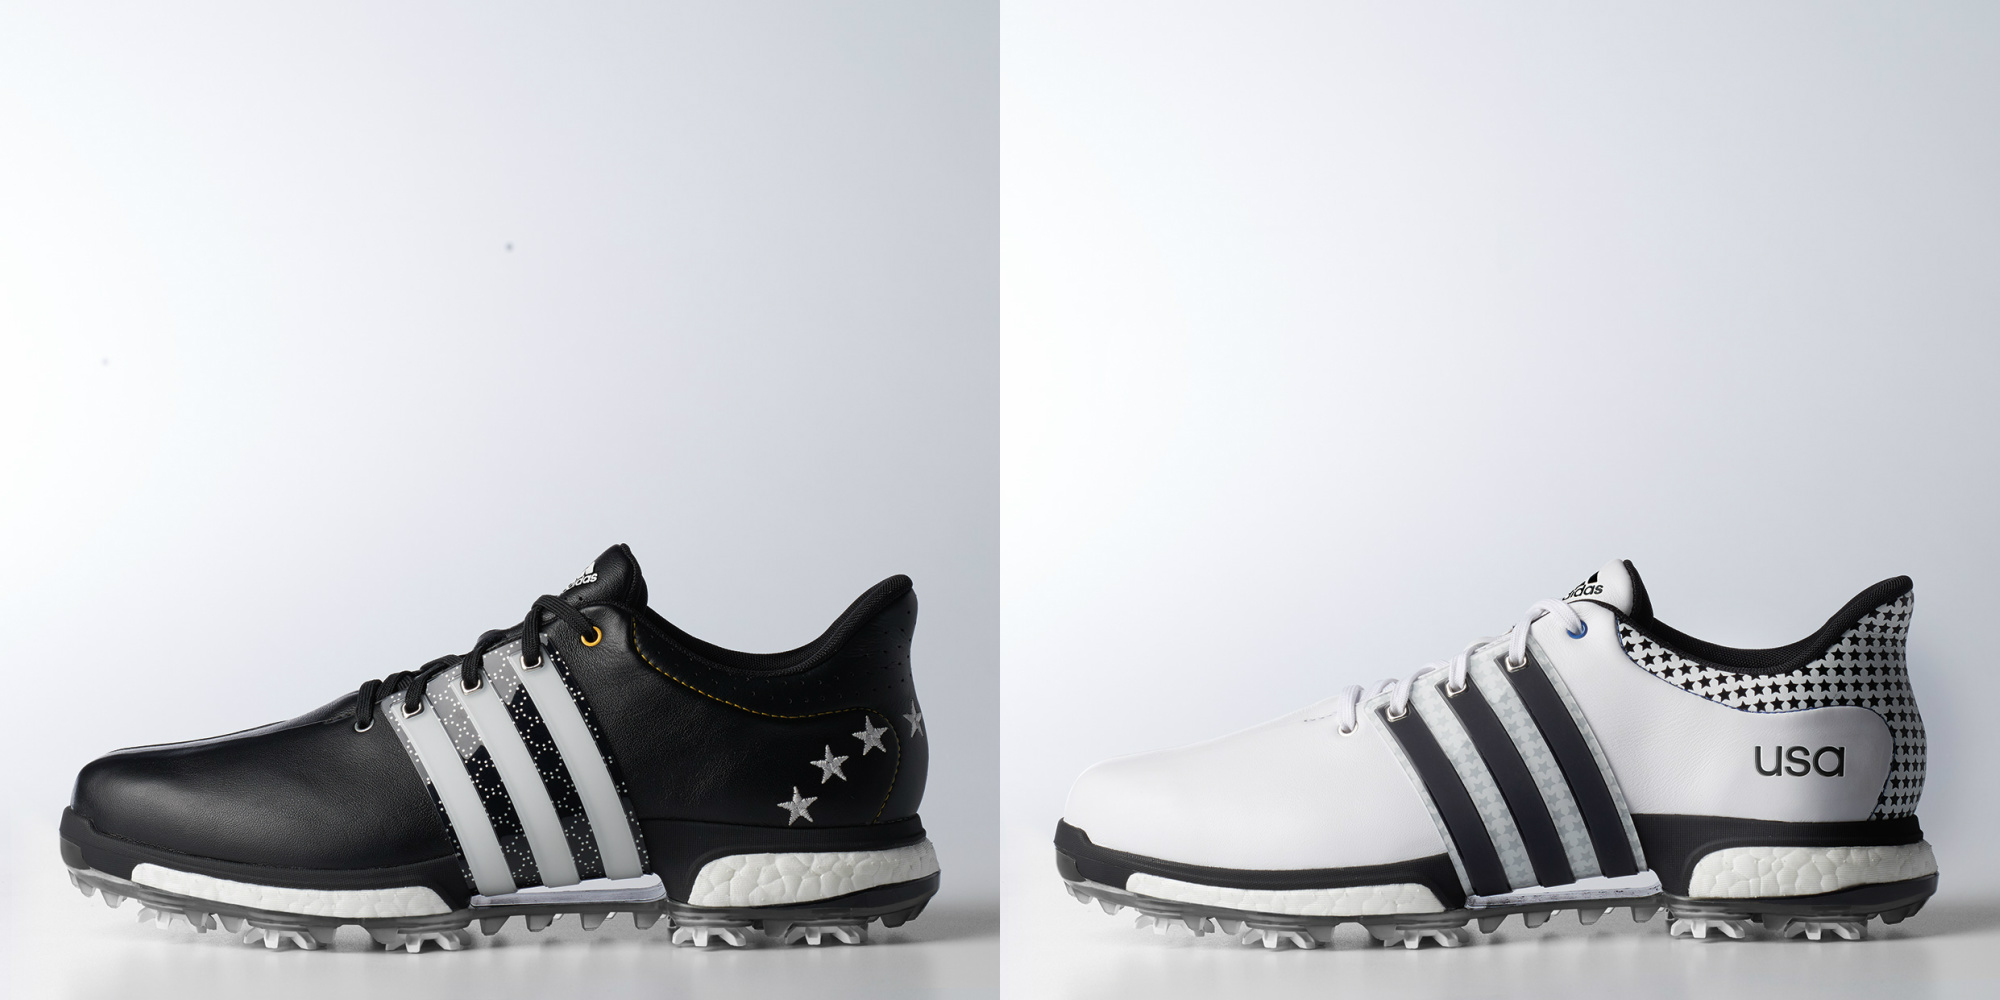 adidas unveil Ryder Cup shoes and apparel 